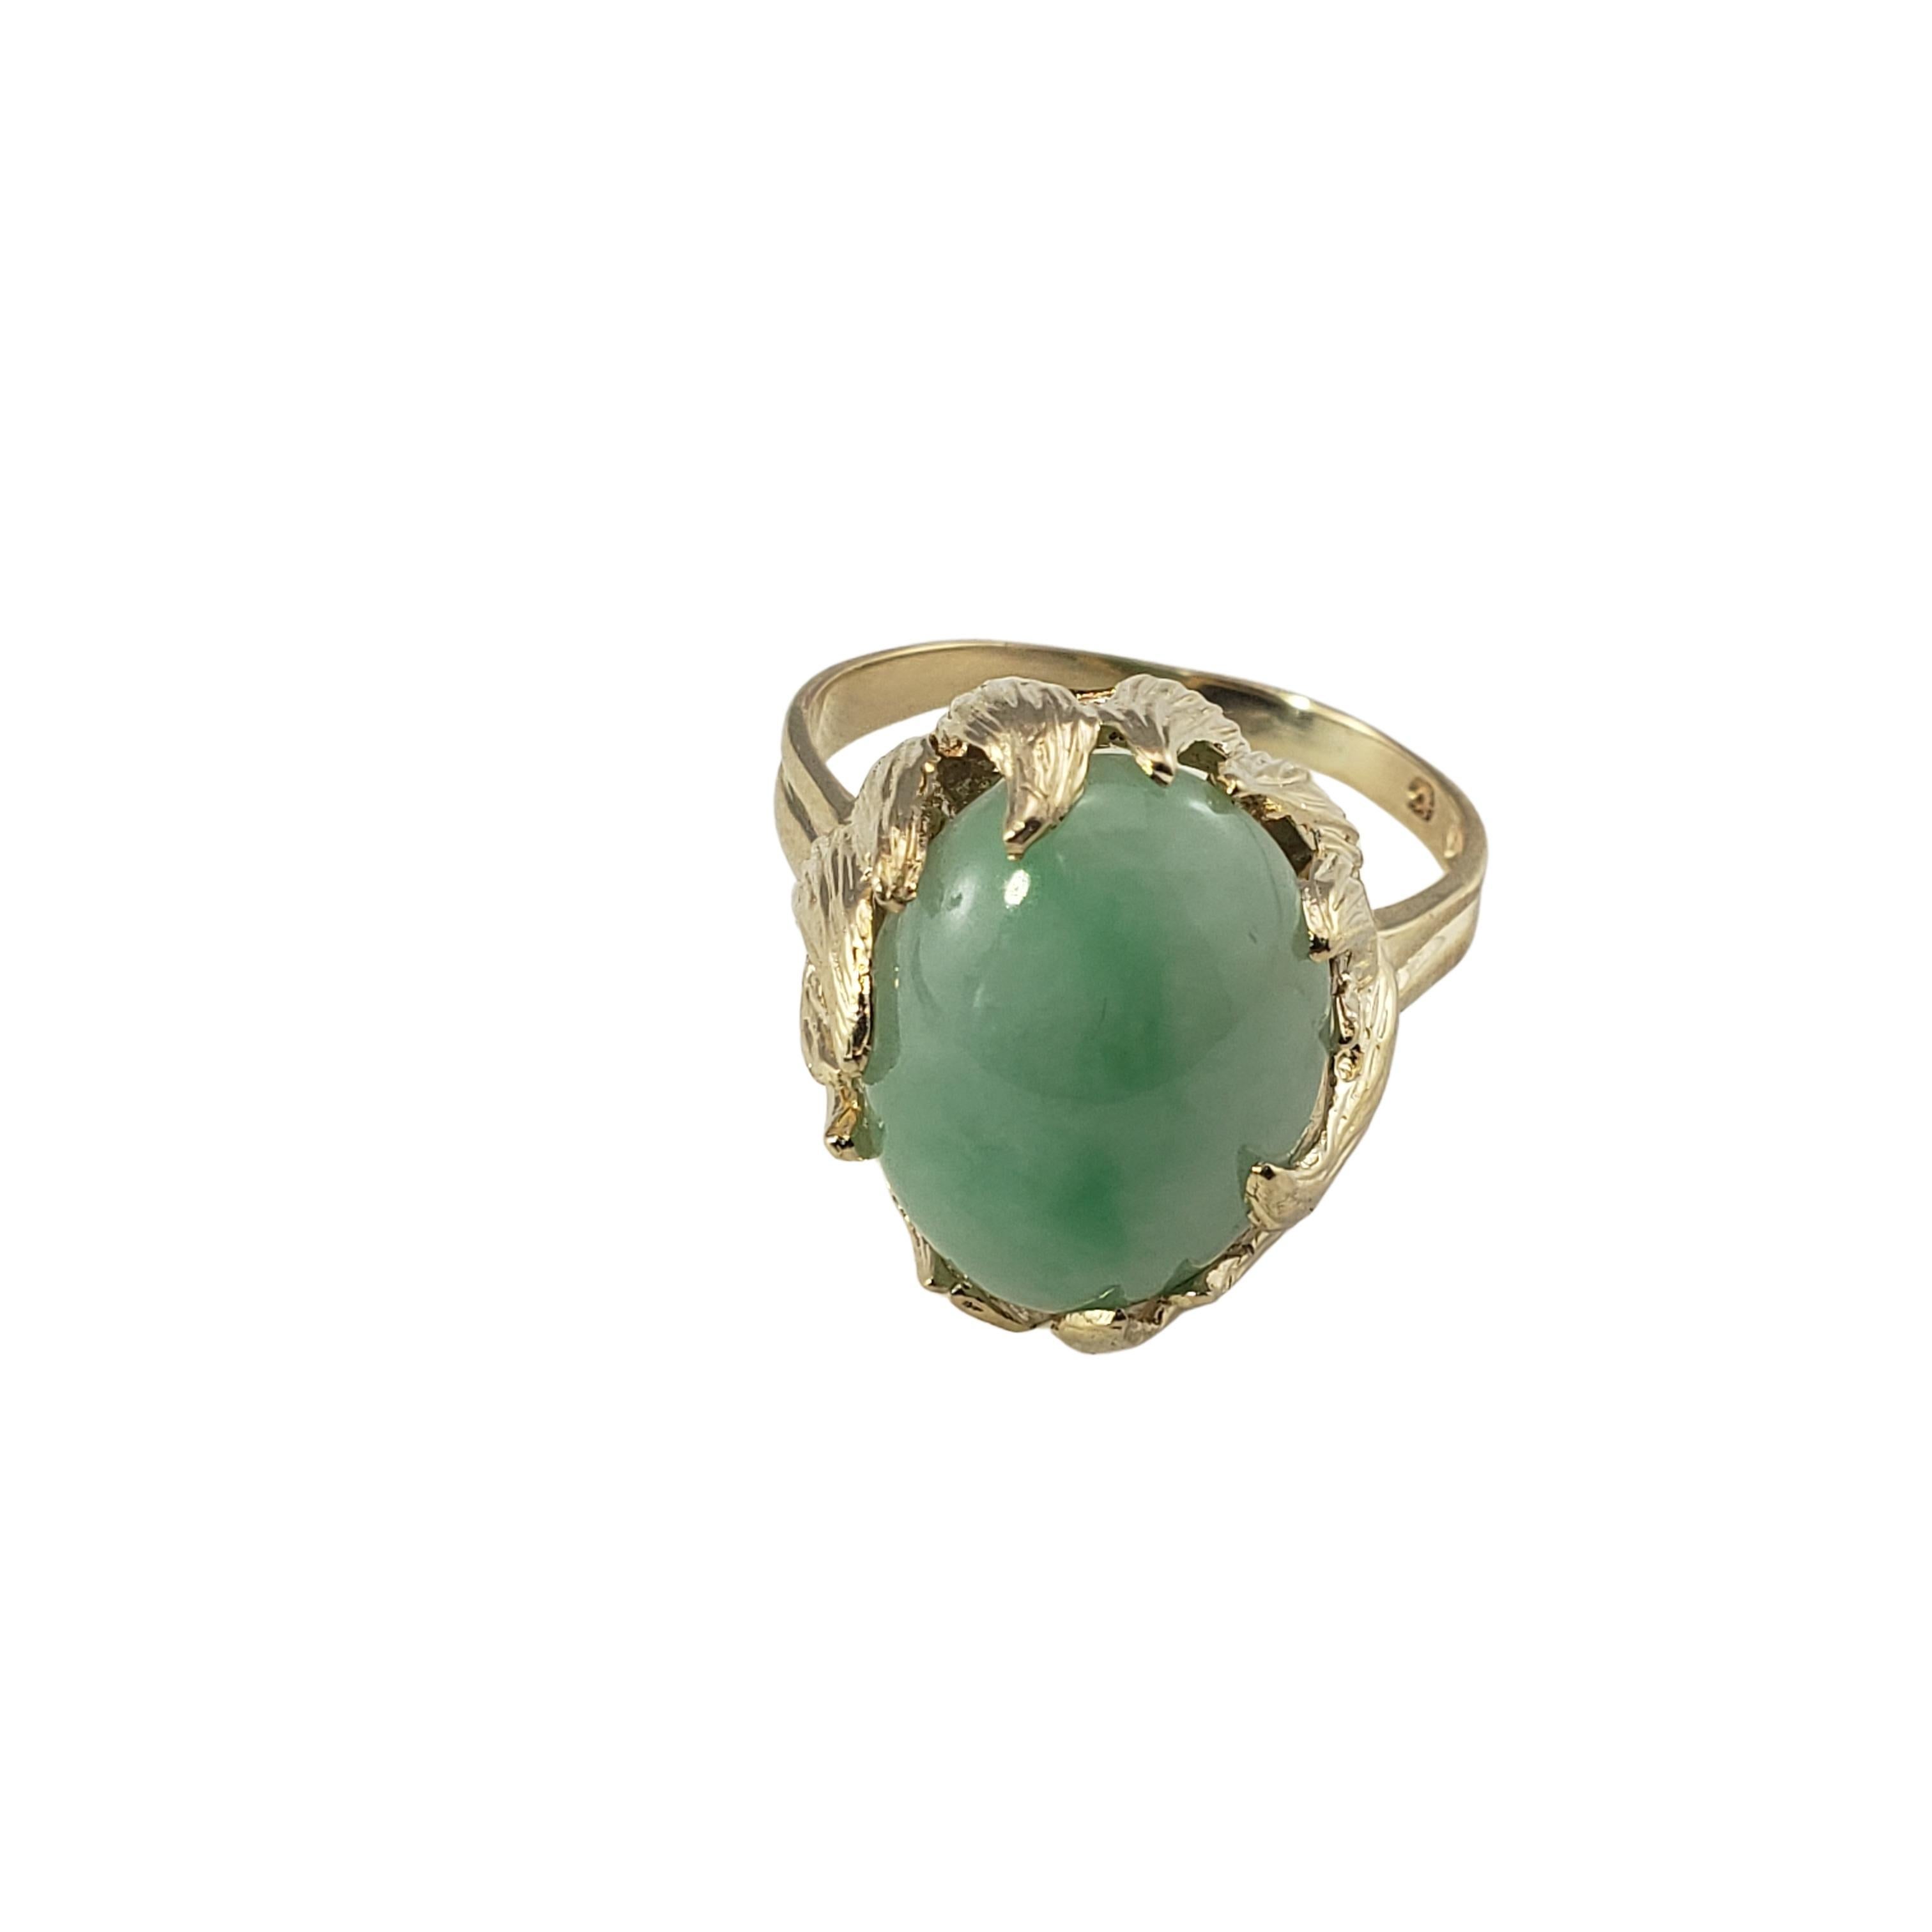 14 Karat Yellow Gold and Jade Ring Size 9-

This lovely ring features one oval jade gemstone (15 mm x 12 mm) set in beautifully detailed 14K yellow gold.  Shank: 2 mm.

Ring Size: 9

Weight:  4. dwt. / 7.3 gr.

Stamped:  14K

Very good condition,